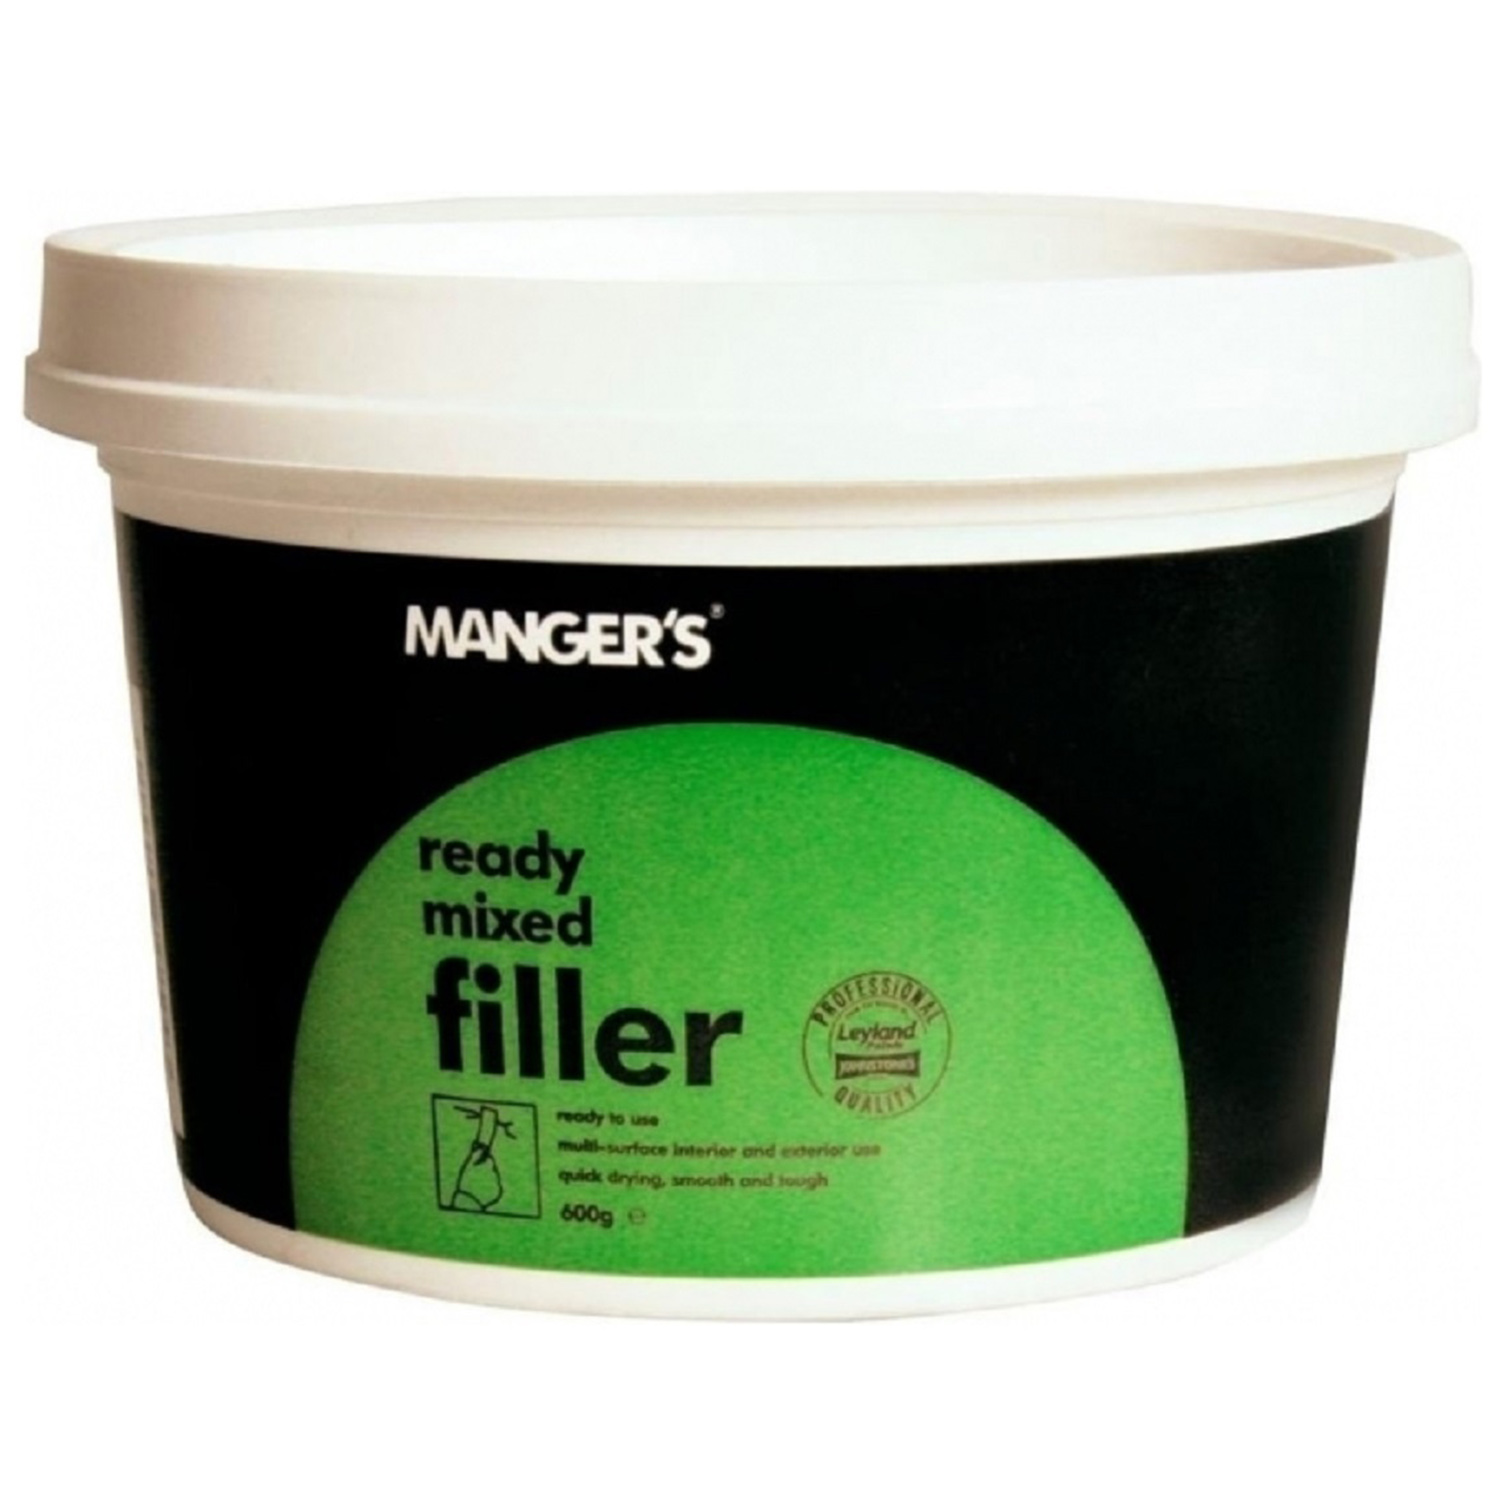 Mangers Ready Mixed Filler Image